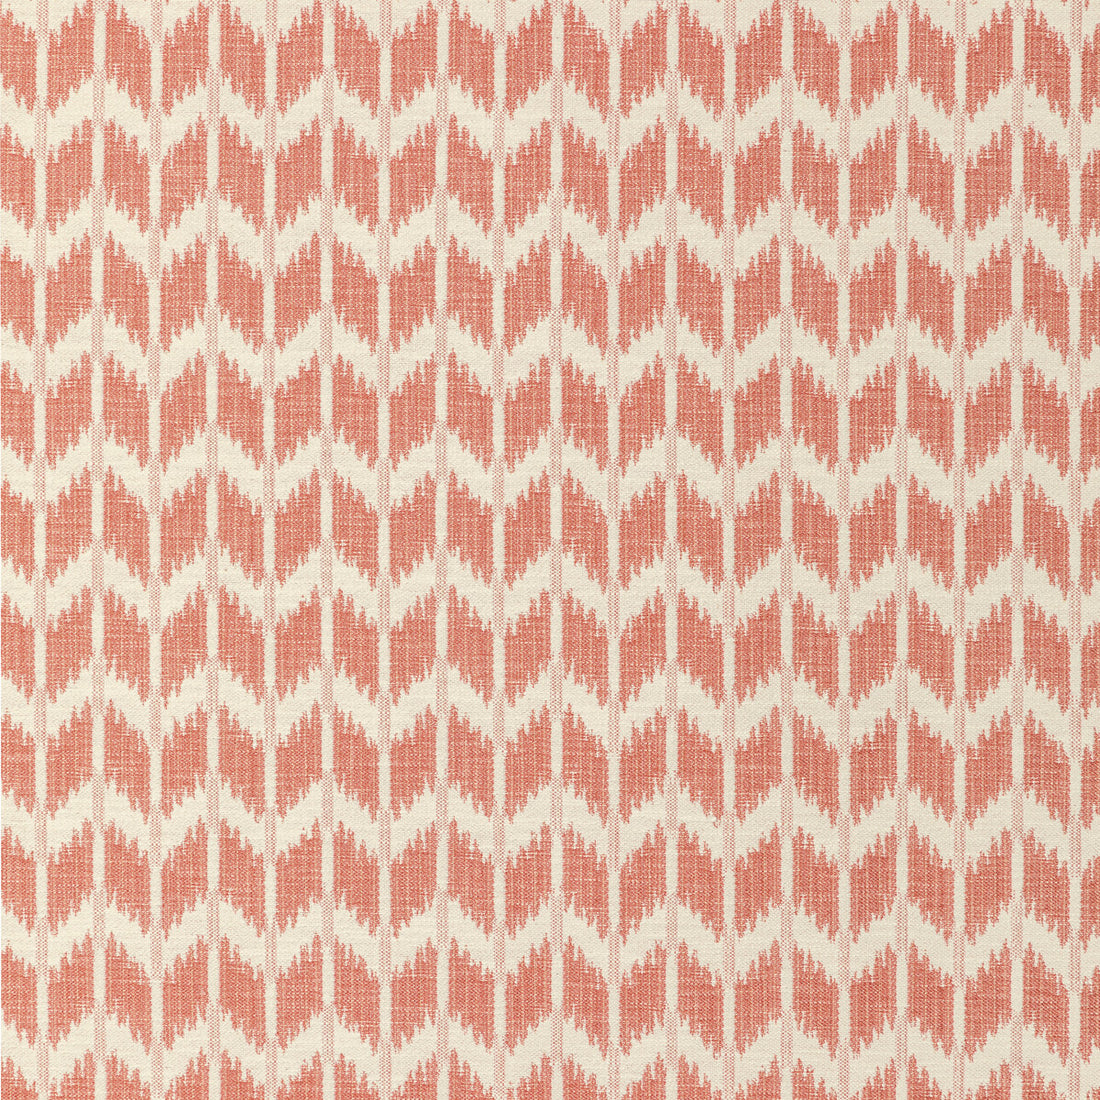 Lorient Weave fabric in petal color - pattern 8022111.7.0 - by Brunschwig &amp; Fils in the Lorient Weaves collection